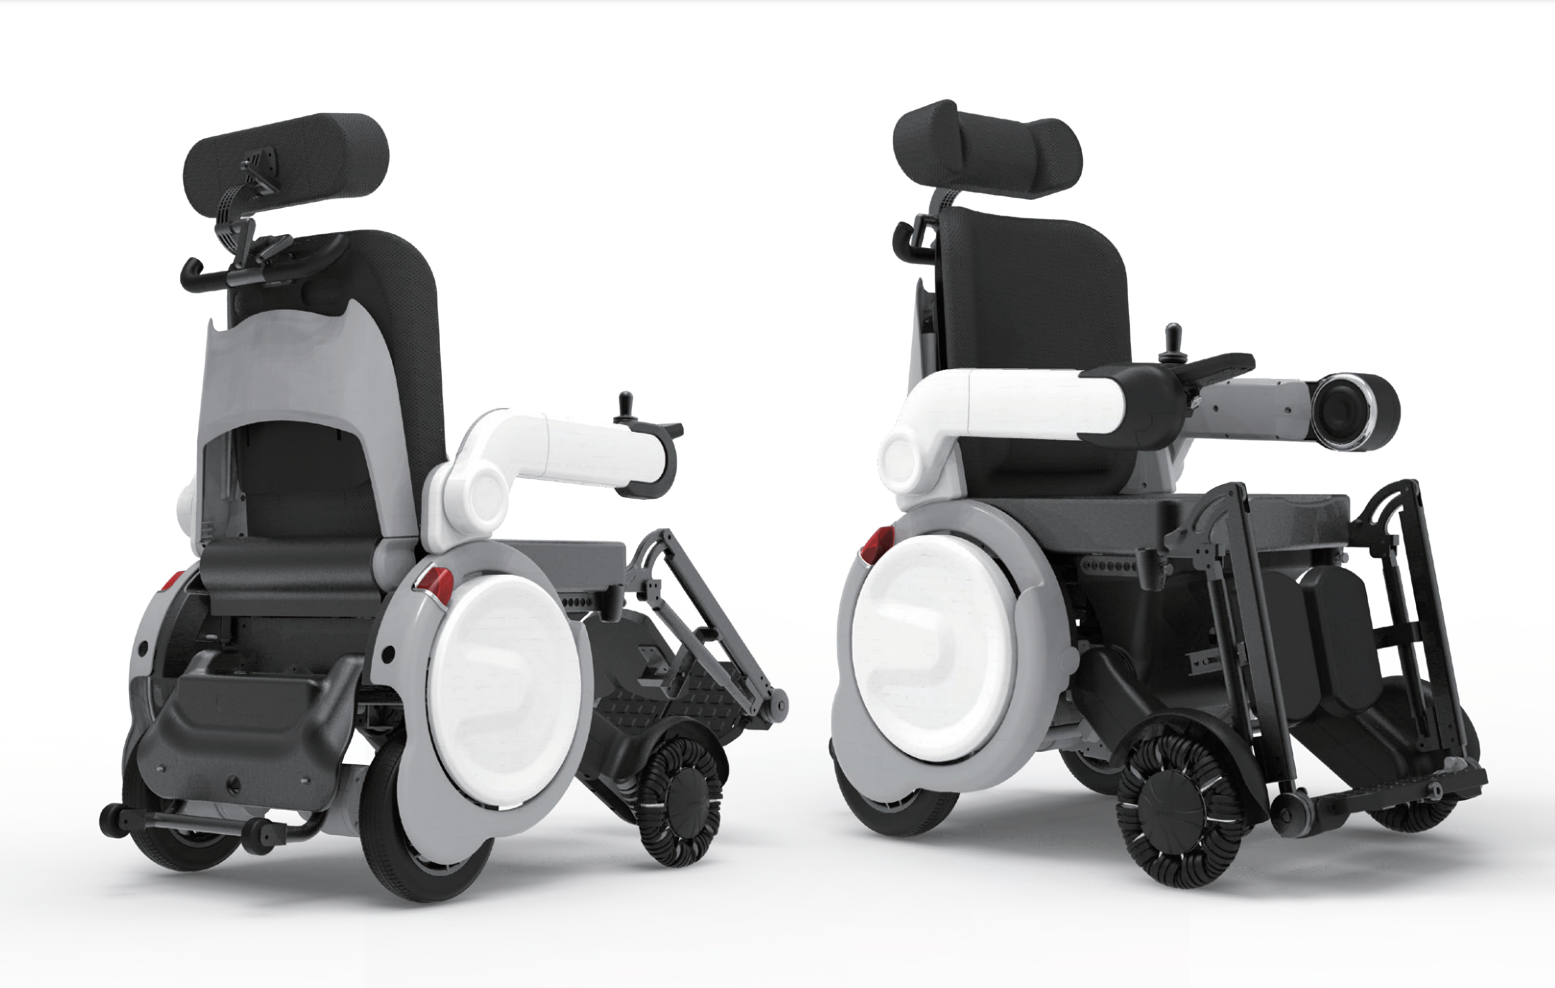 launch a product in the KIMES EXHIBITION -- Electric folding wheelchair